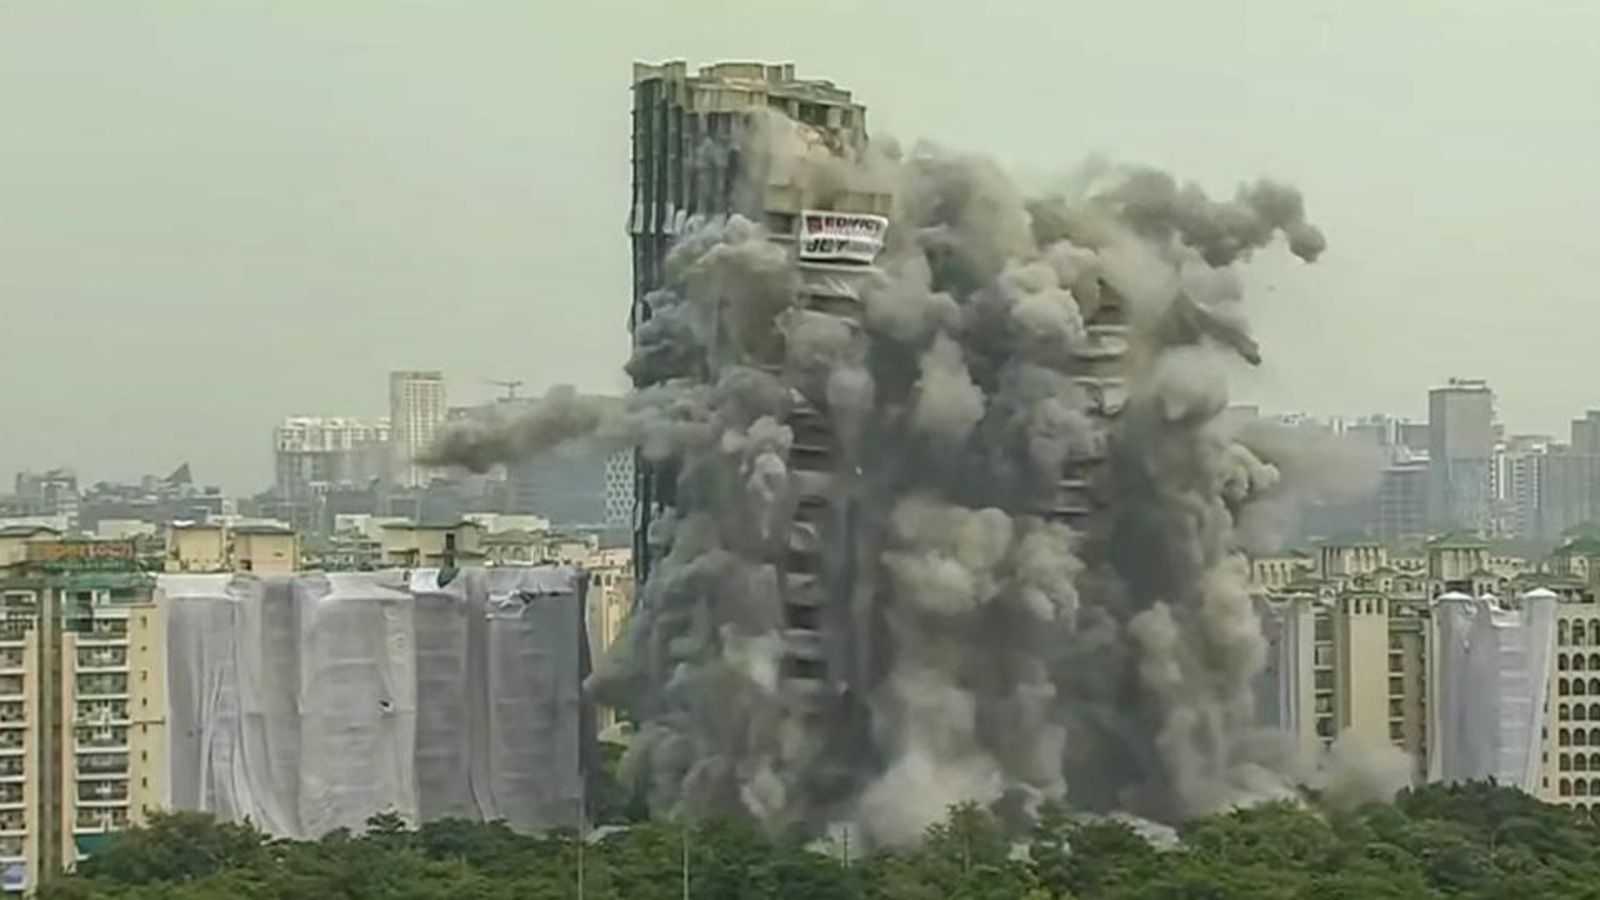 Noida Supertech twin towers razed to ground in seconds | Watch | Latest News India - Hindustan Times